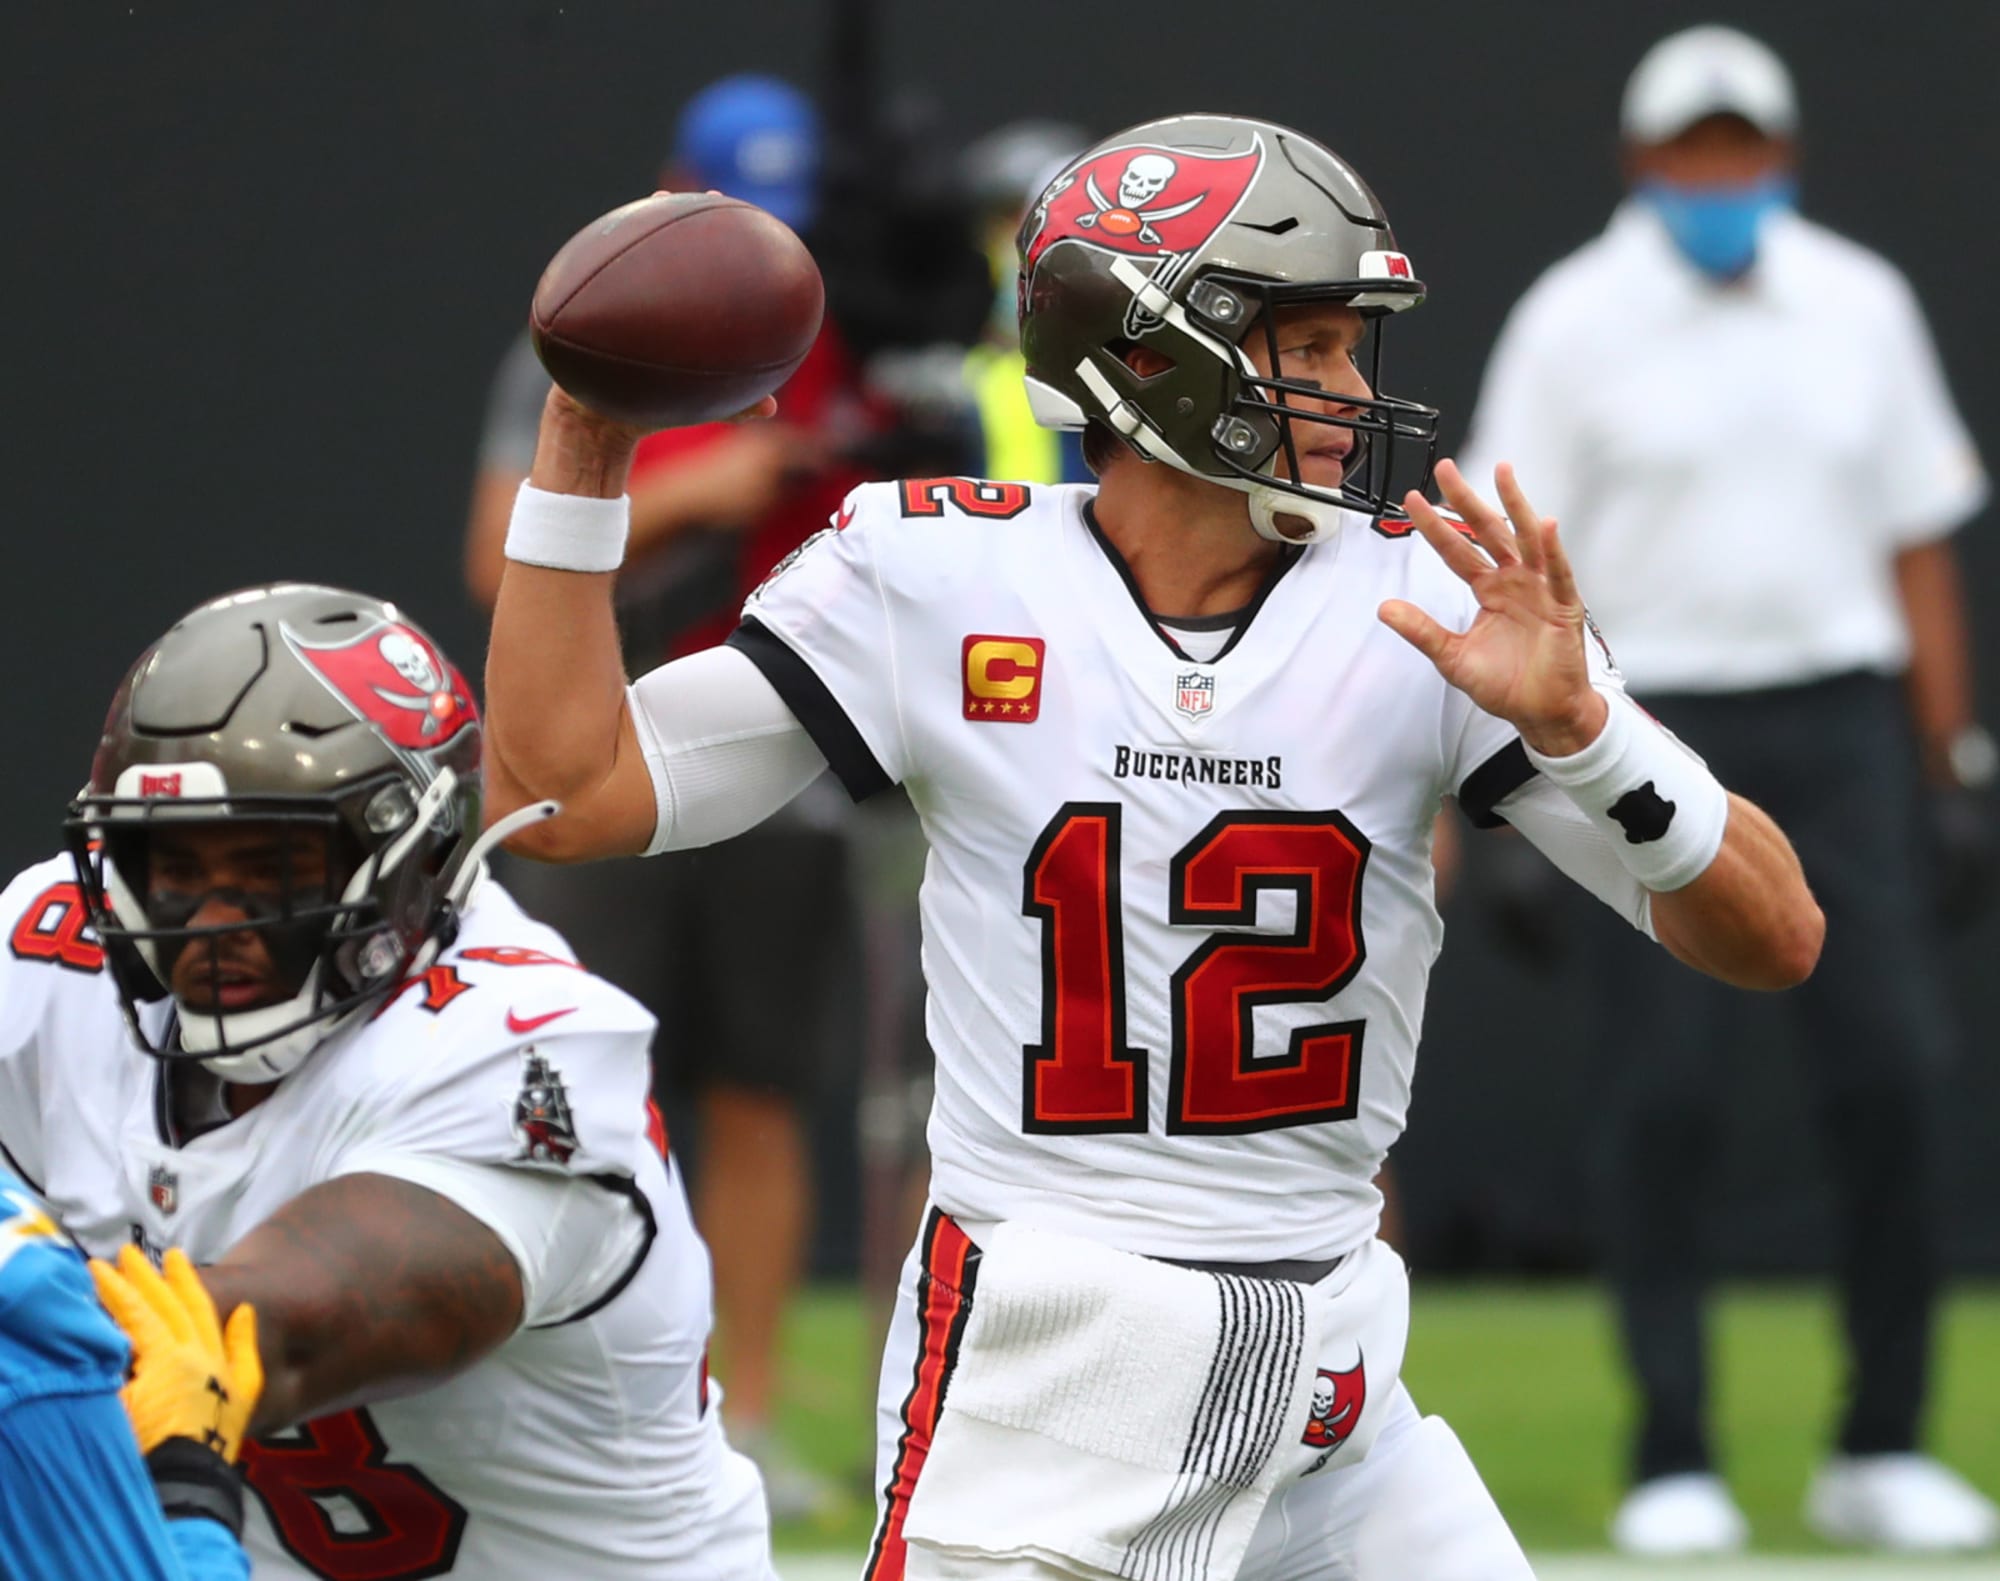 Buccaneers vs. Bears live stream: Watch online, TV info, kickoff time, more